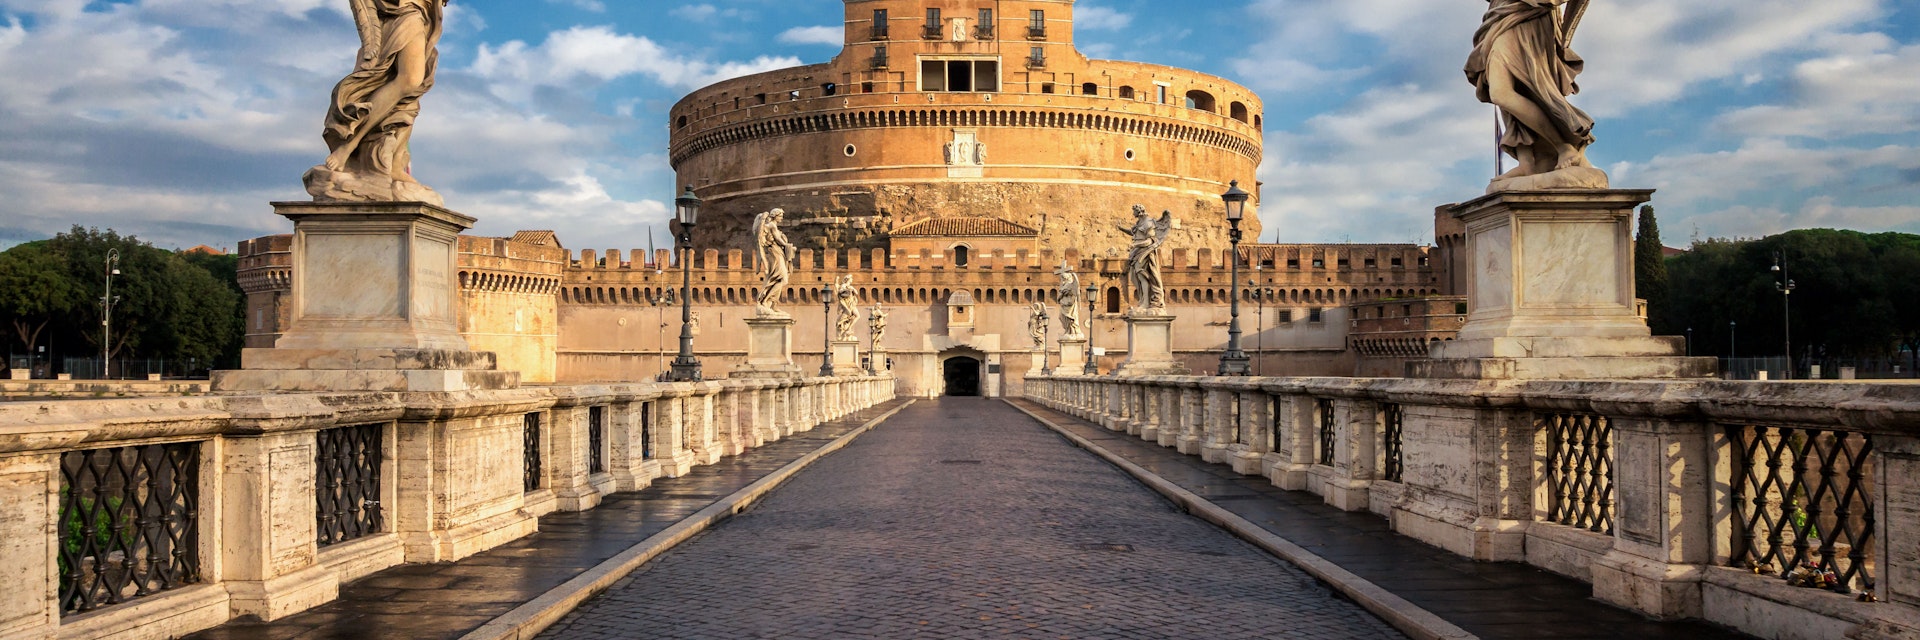 Castel Sant Angelo or Mausoleum of Hadrian in Rome.